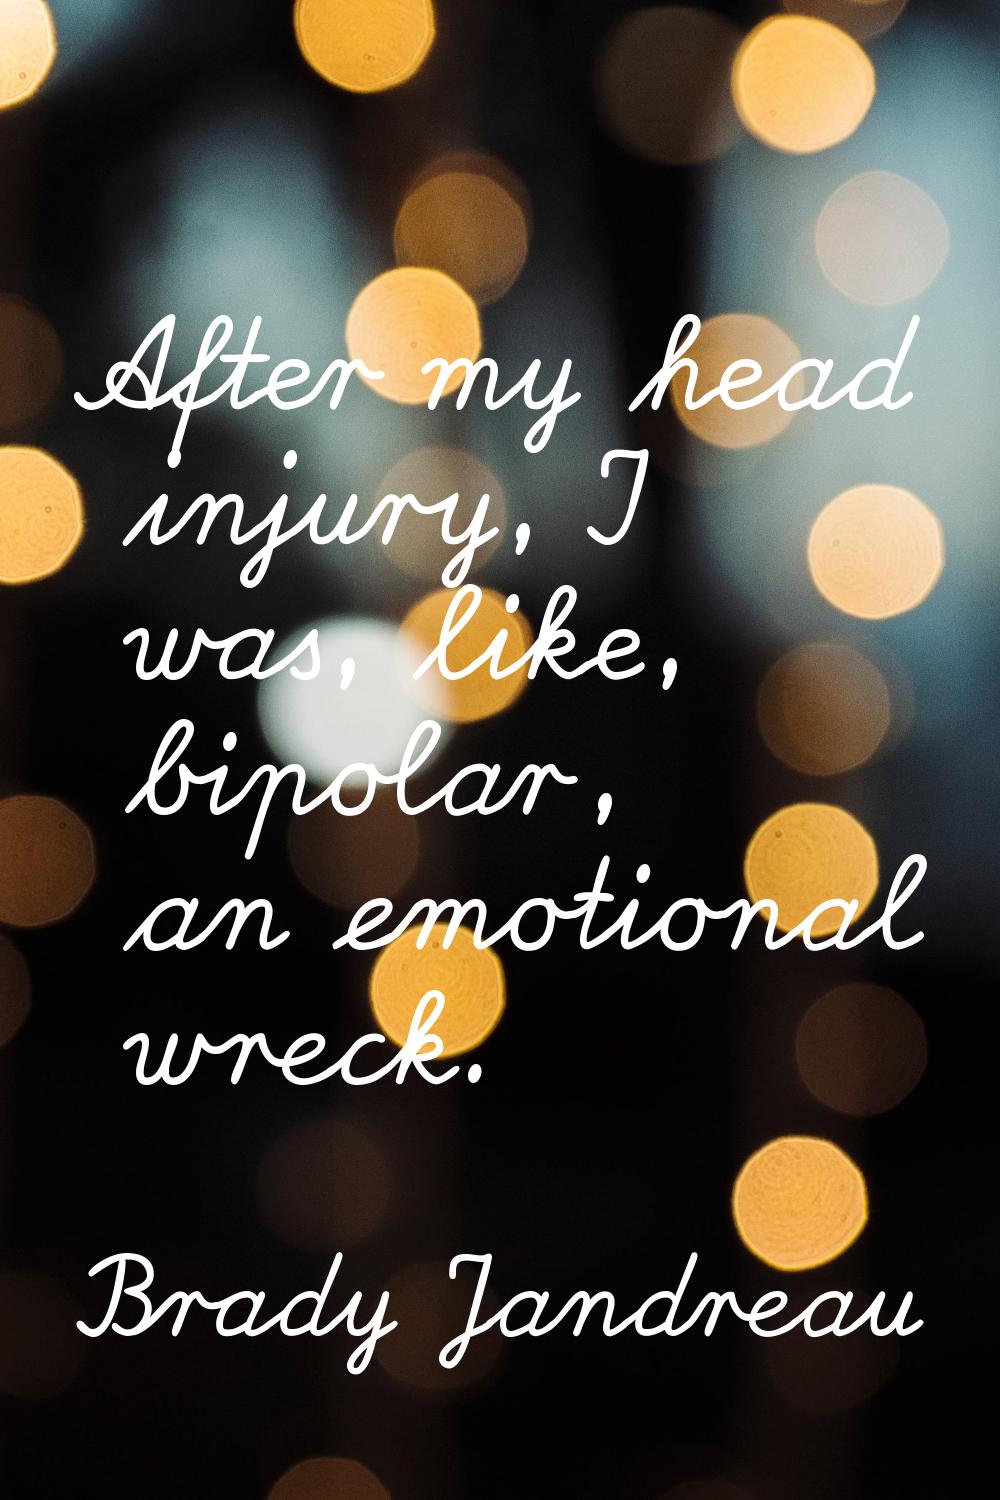 After my head injury, I was, like, bipolar, an emotional wreck.